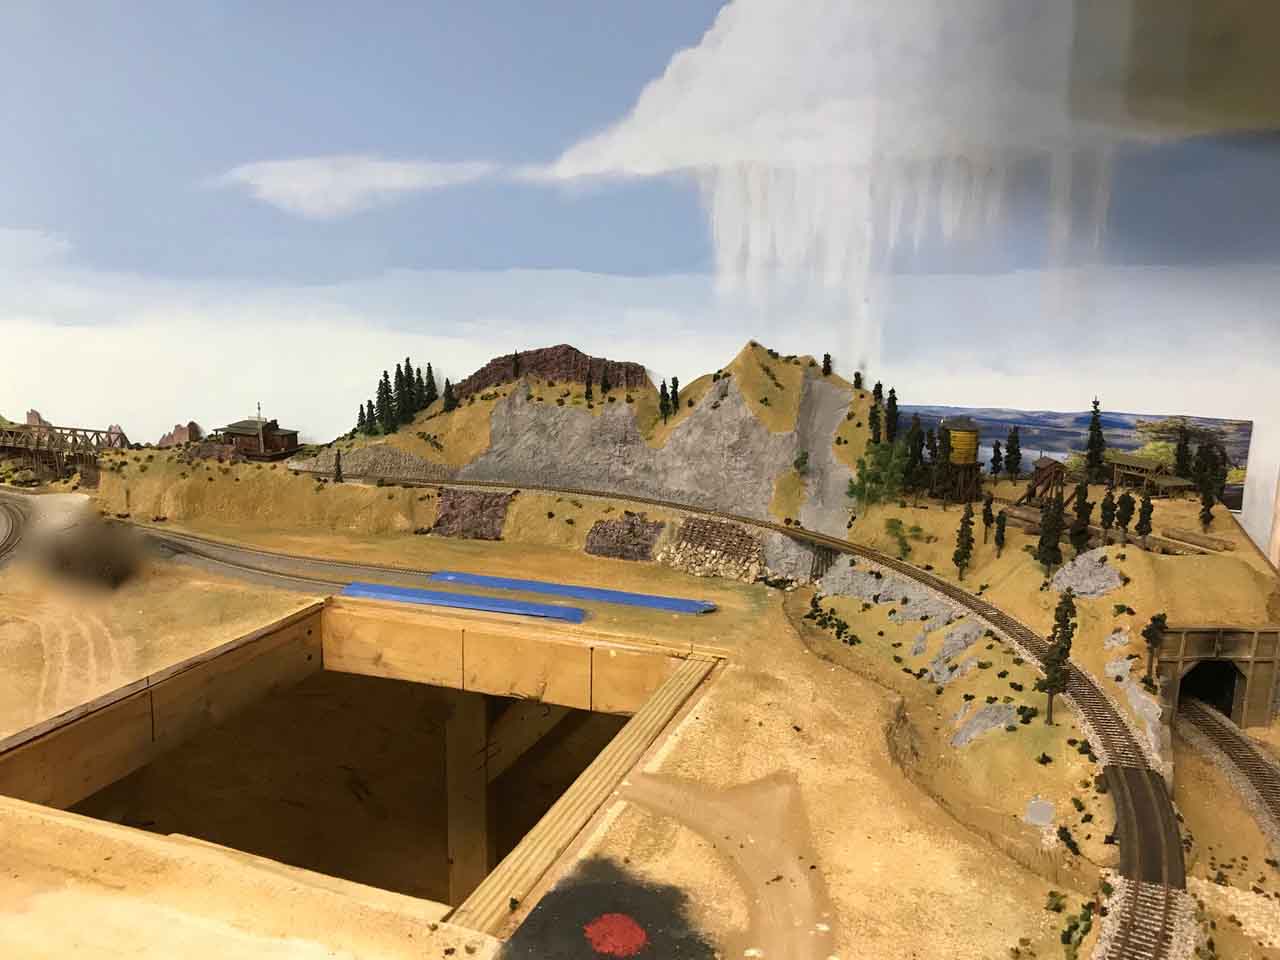 HO scale with middle access hole